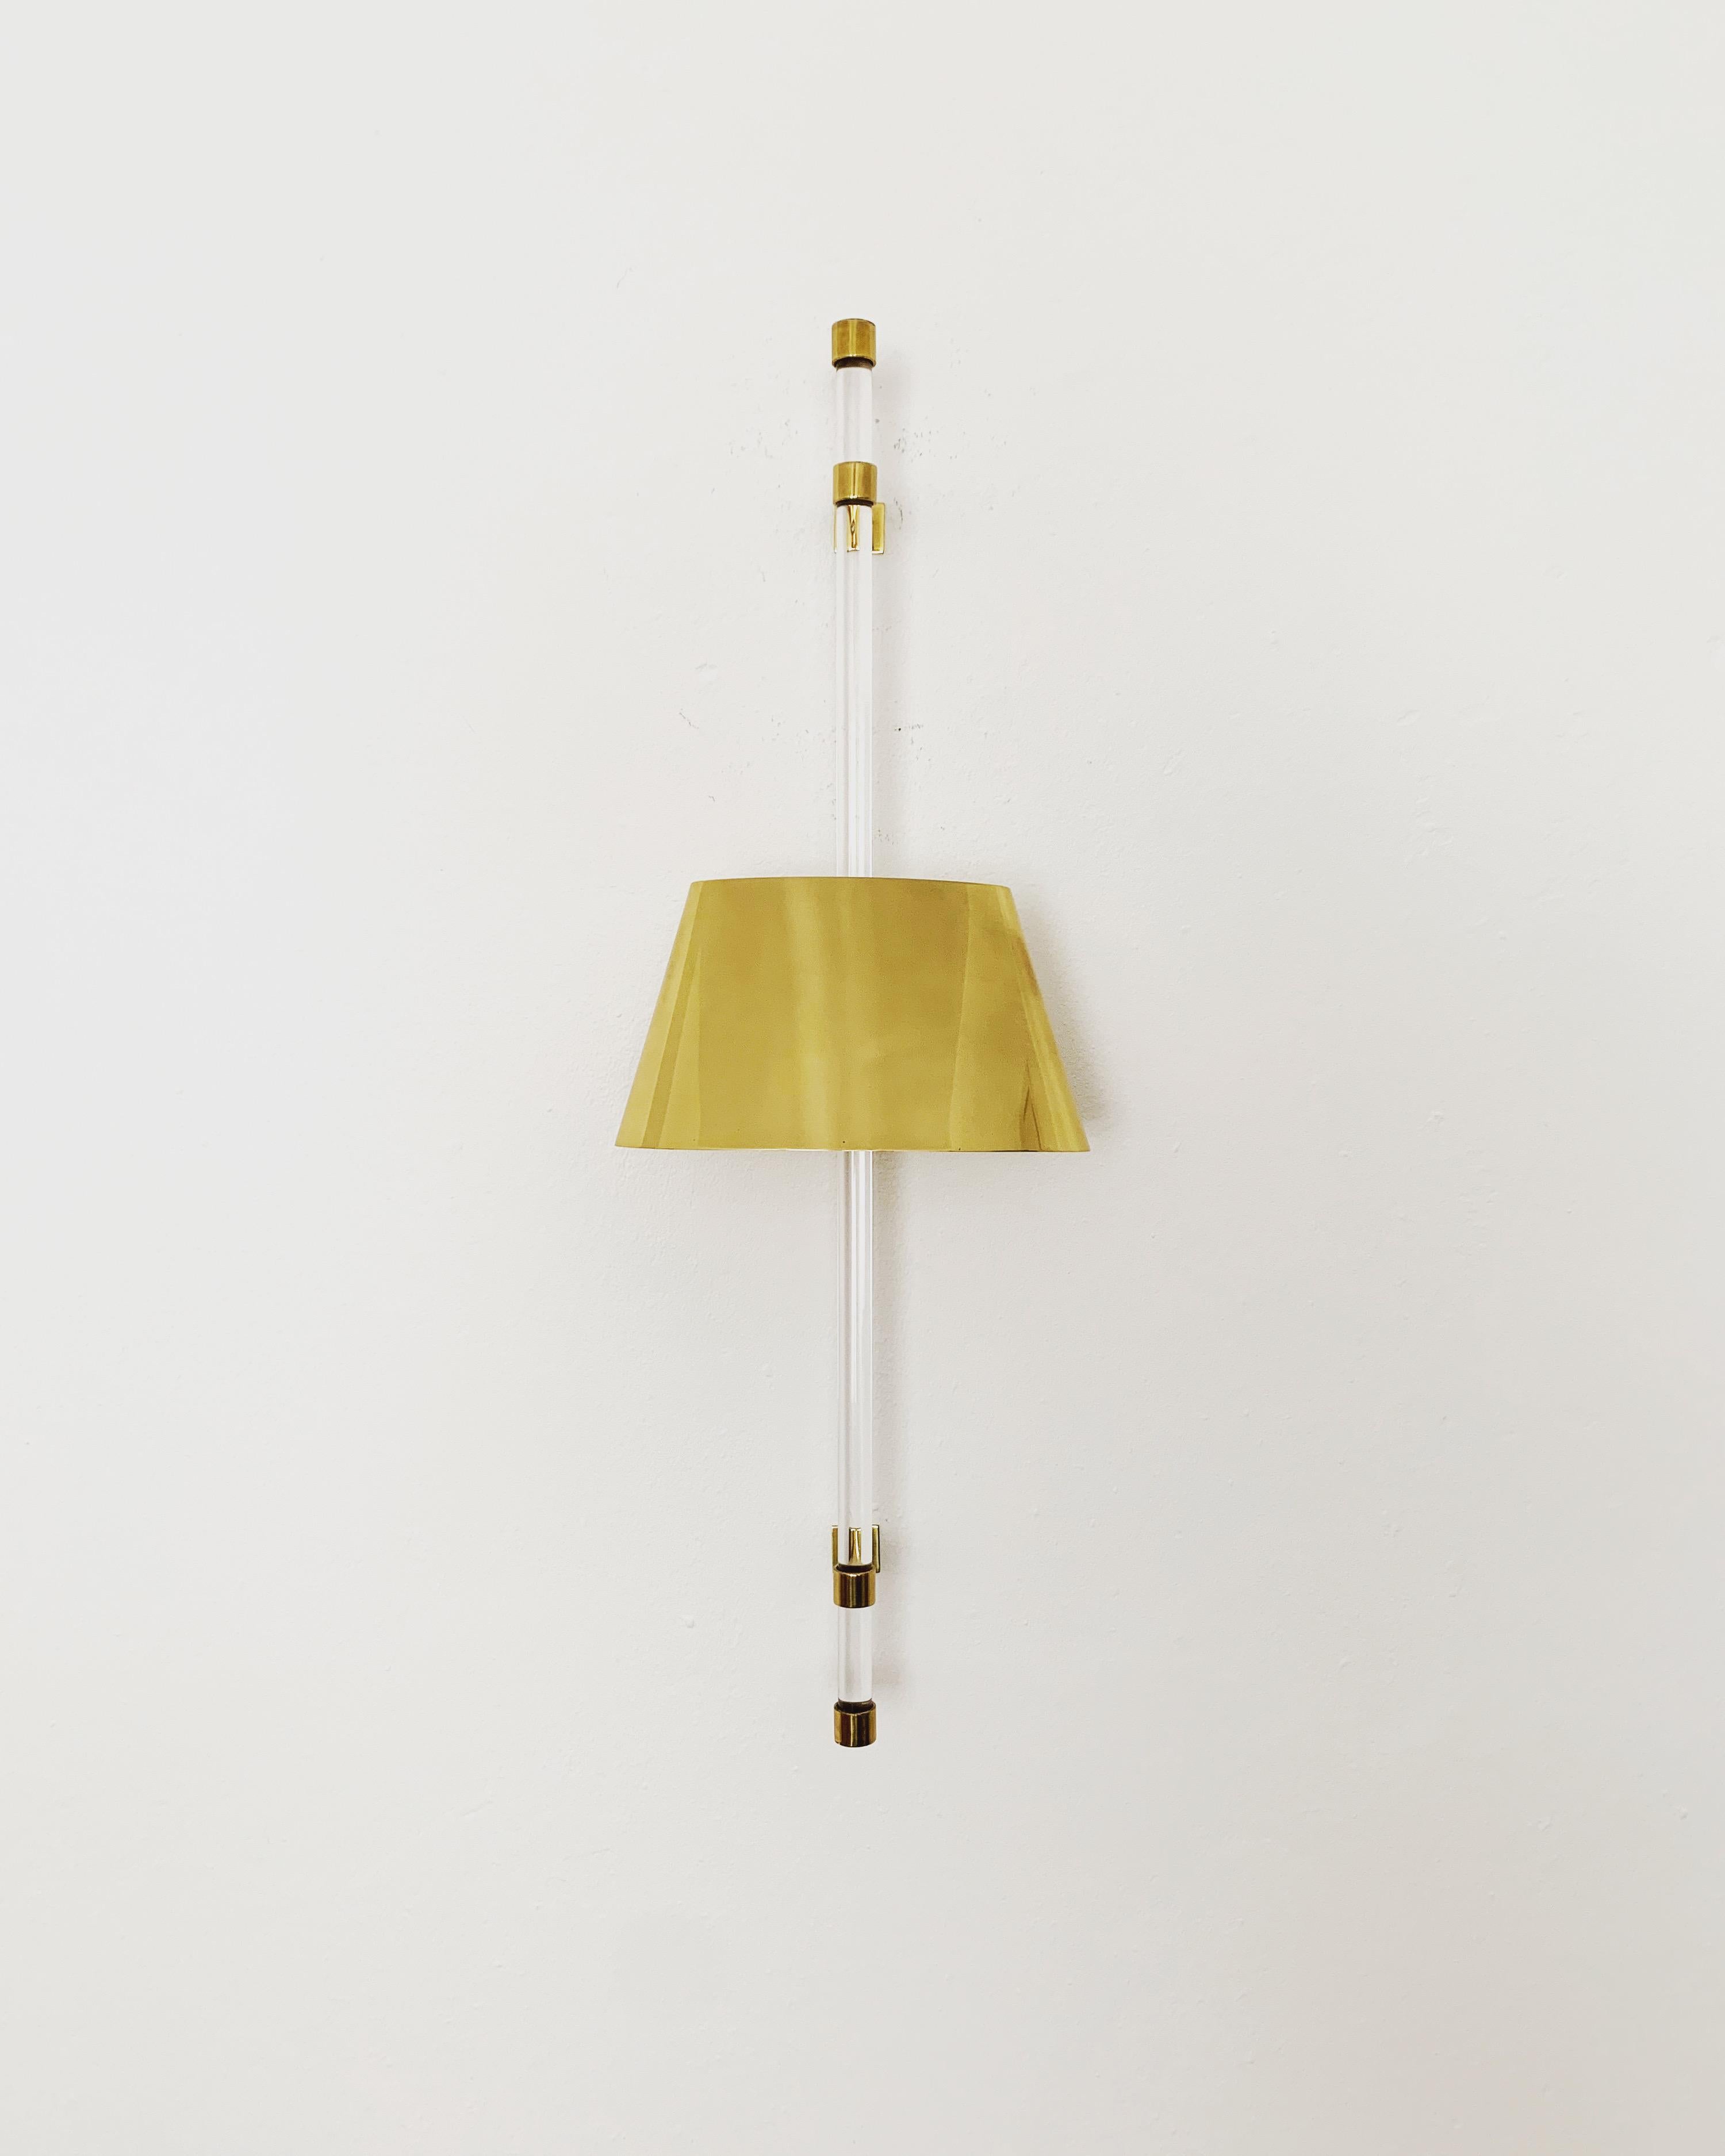 Very nice wall lamp from the 1960s.
Unusual design and very high-quality workmanship.
The brass creates an impressive play of light.

Condition:

Very good vintage condition with slight signs of wear consistent with age.
Slight signs of wear